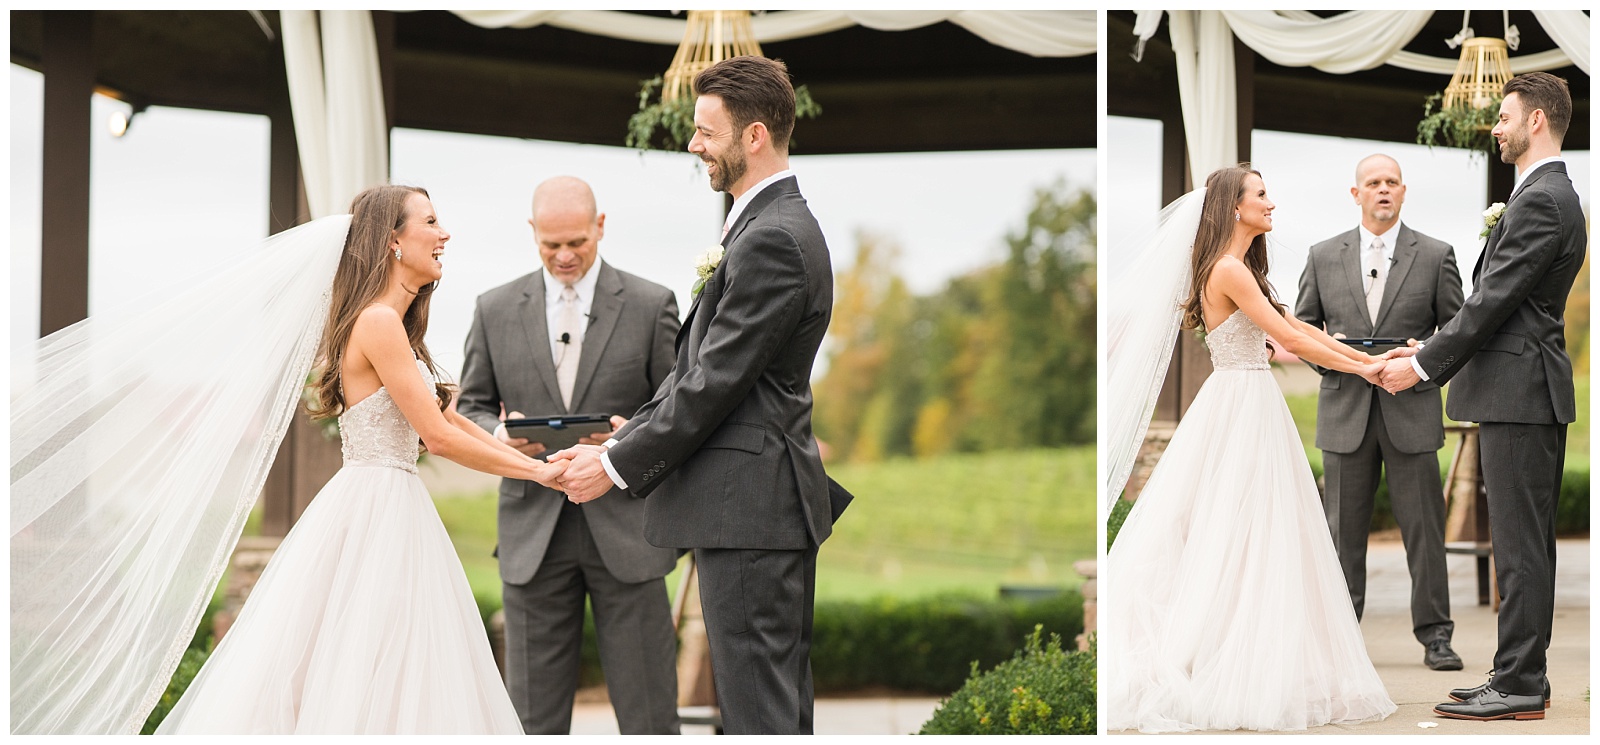 emotions and laughter during beautiful and joyful wedding ceremony